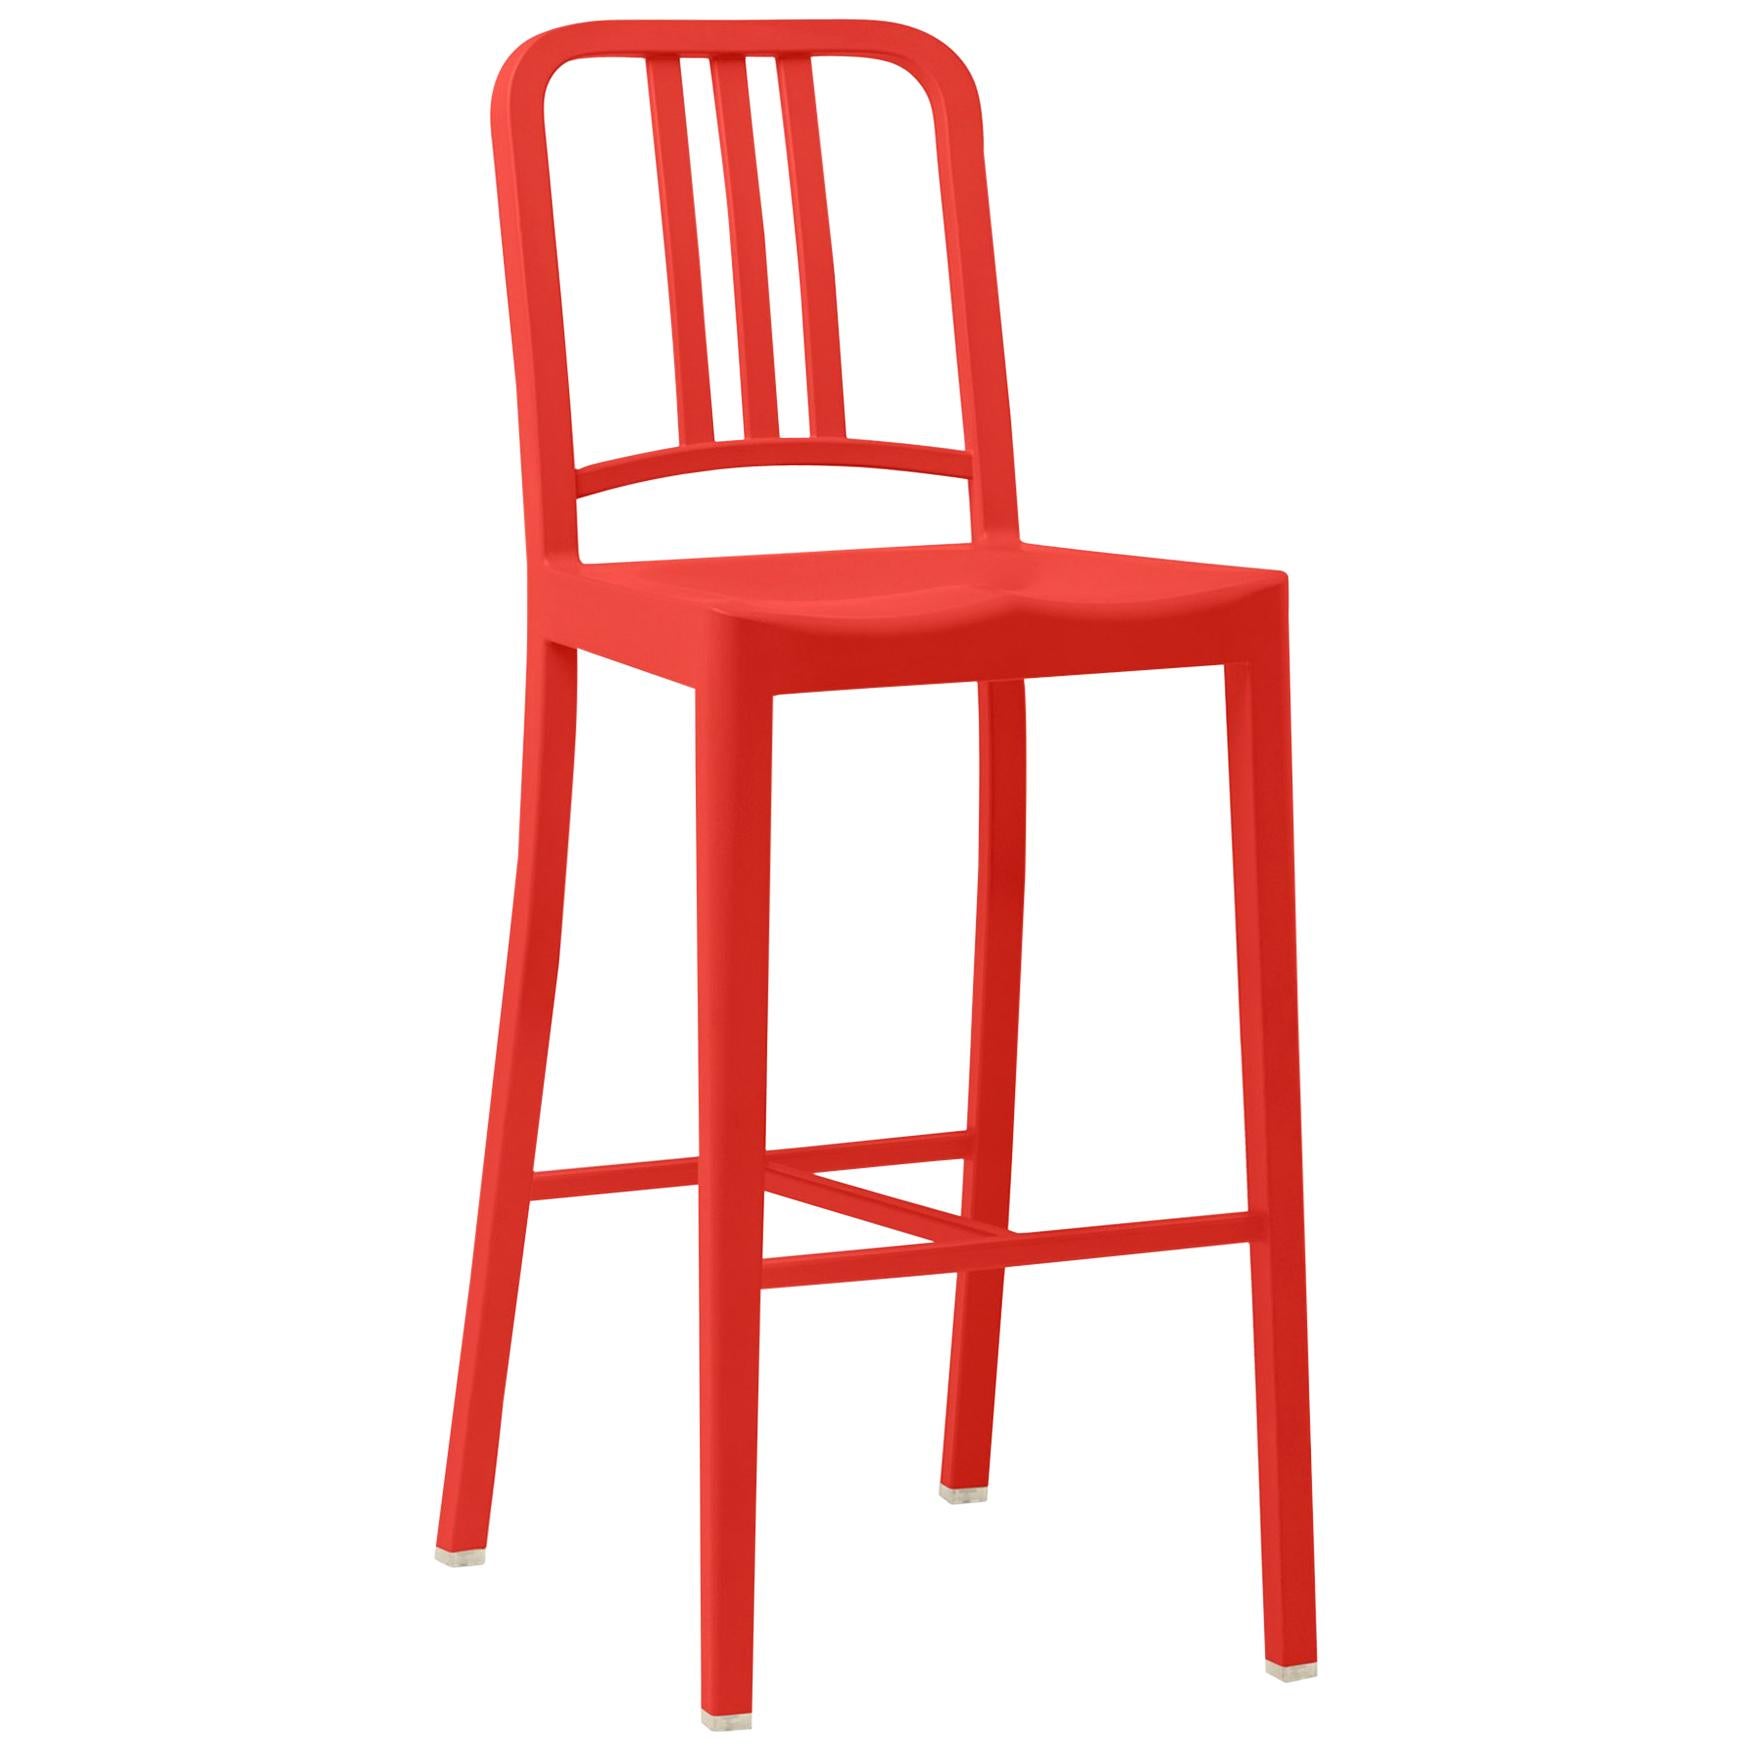 Emeco 111 Navy Barstool in Red by Coca-Cola